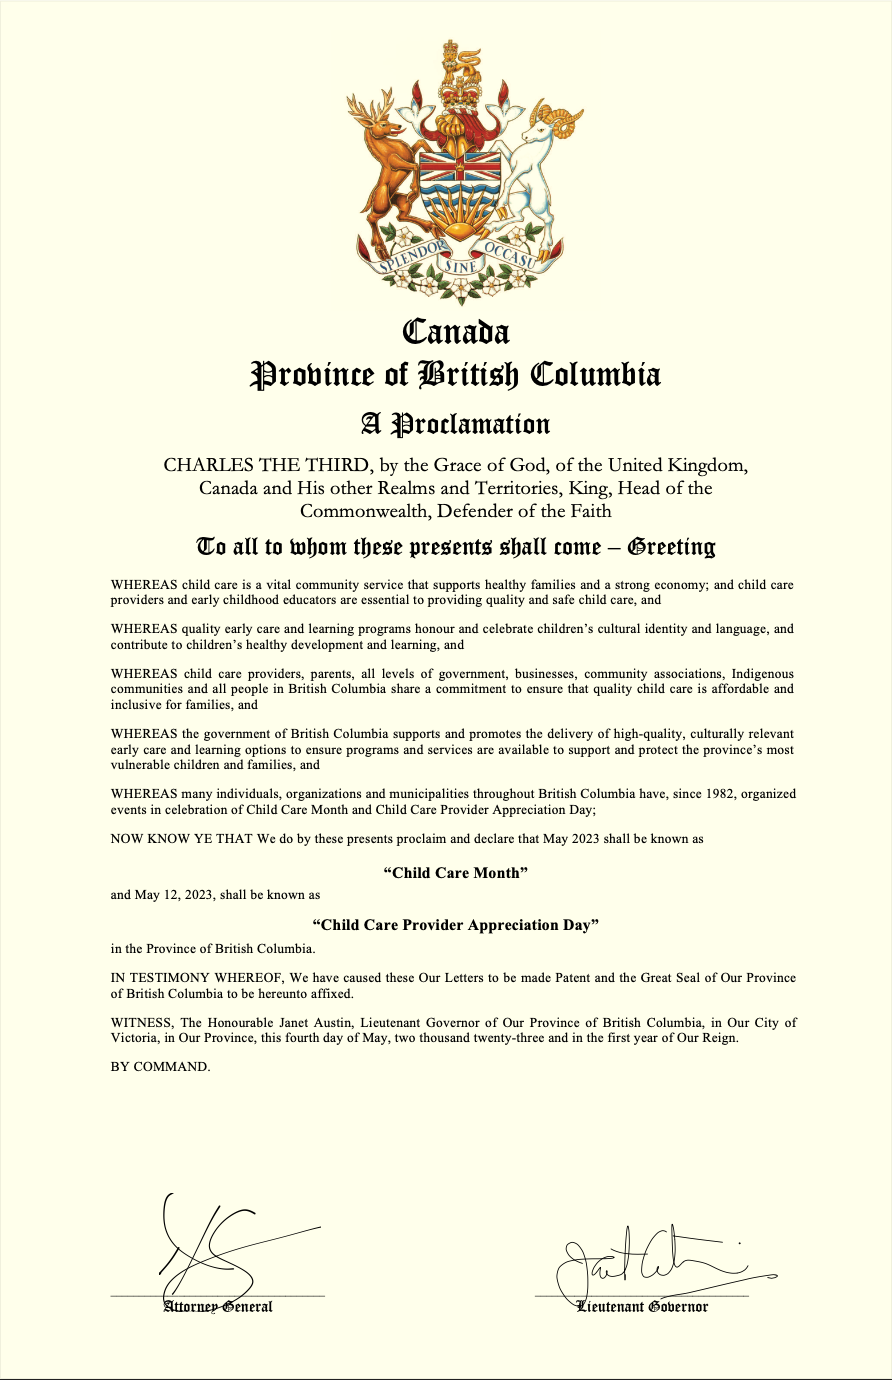 BC Proclamation for Child Care Month and Child Care Appreciation Day